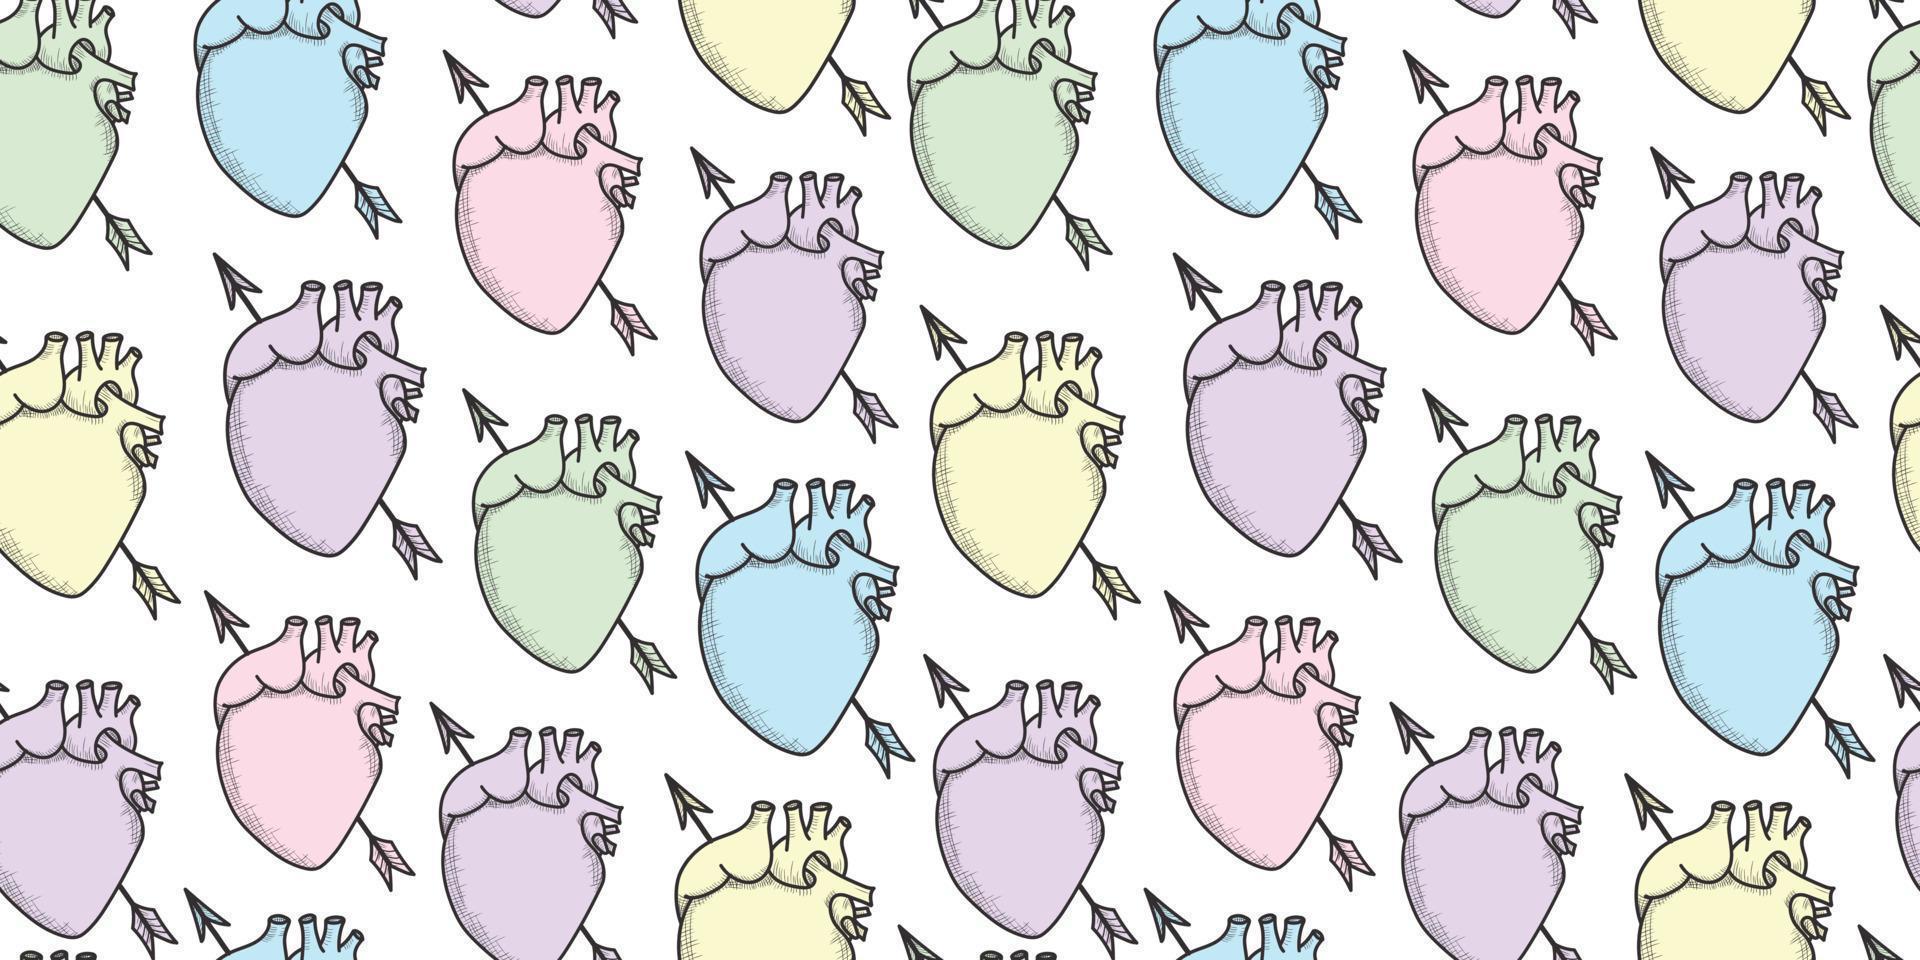 Colorful anatomical hearts vector pattern background